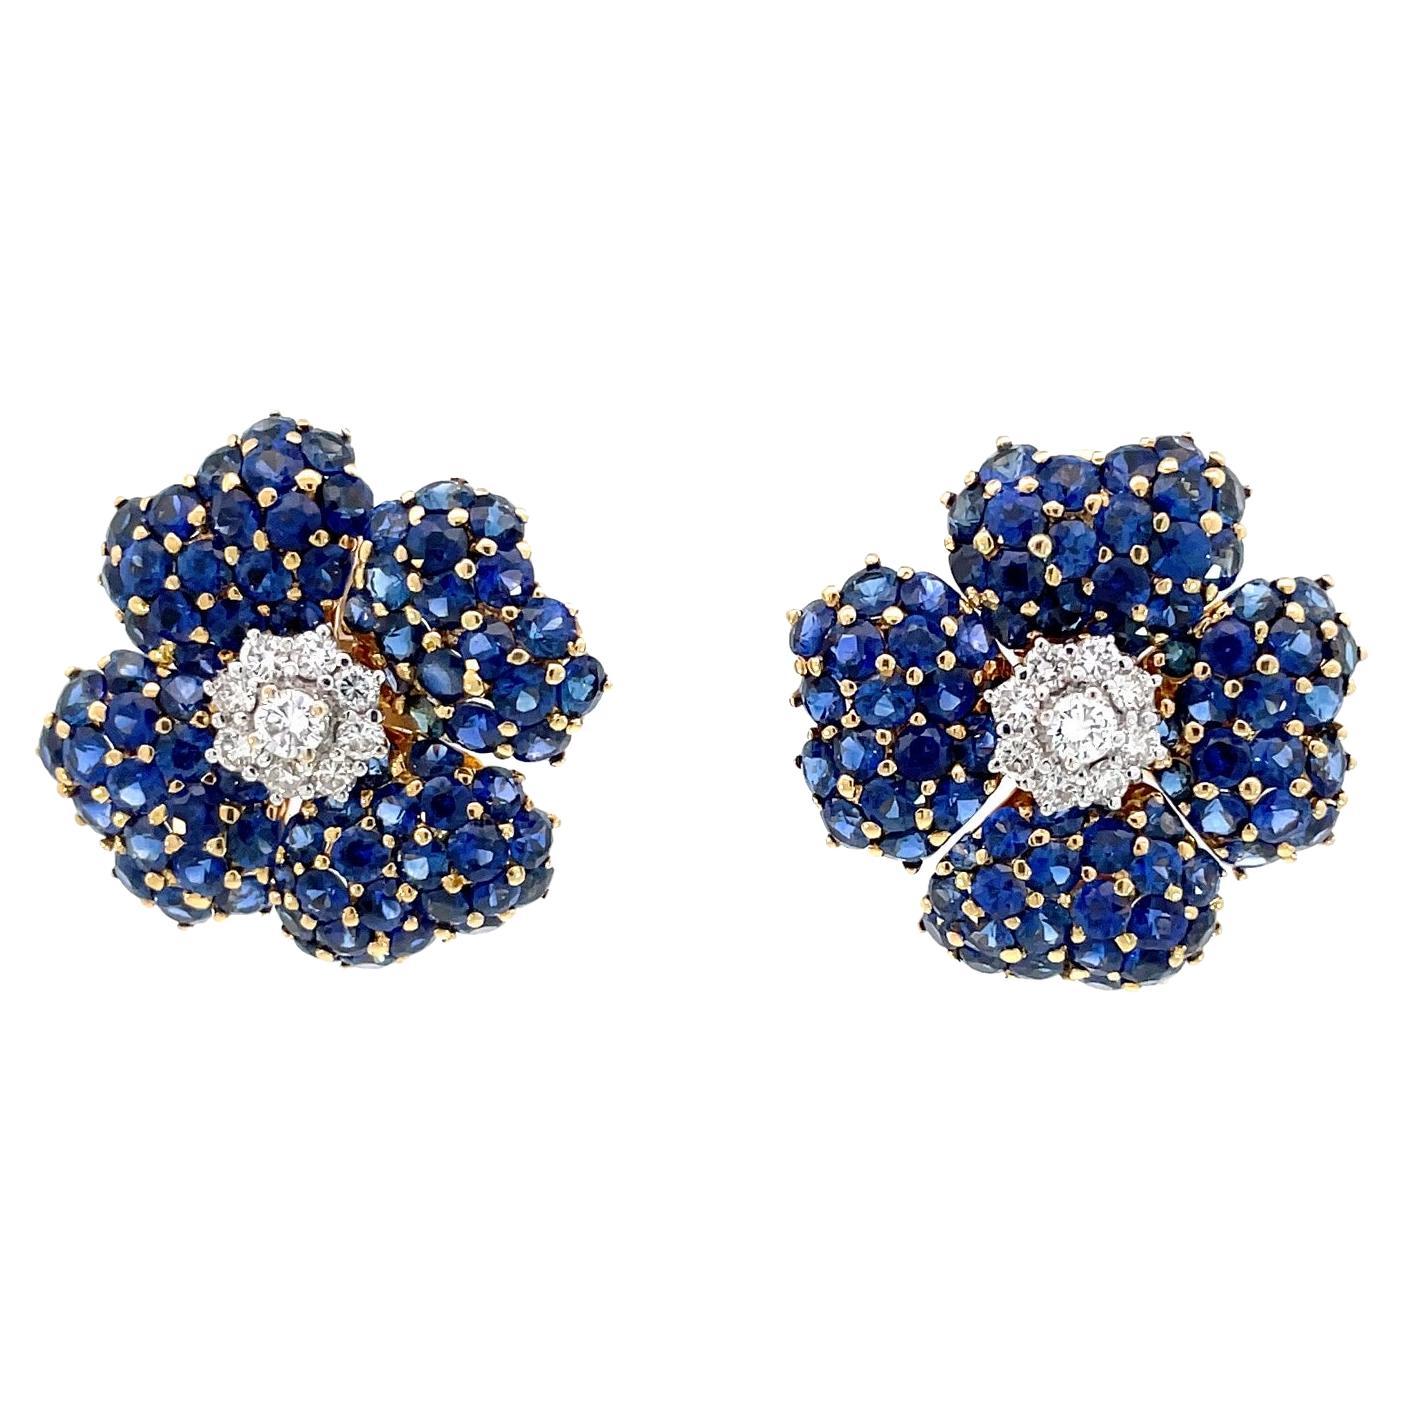 Large Sapphire and Diamond Clover Earrings in 18 Karat White & Yellow Gold